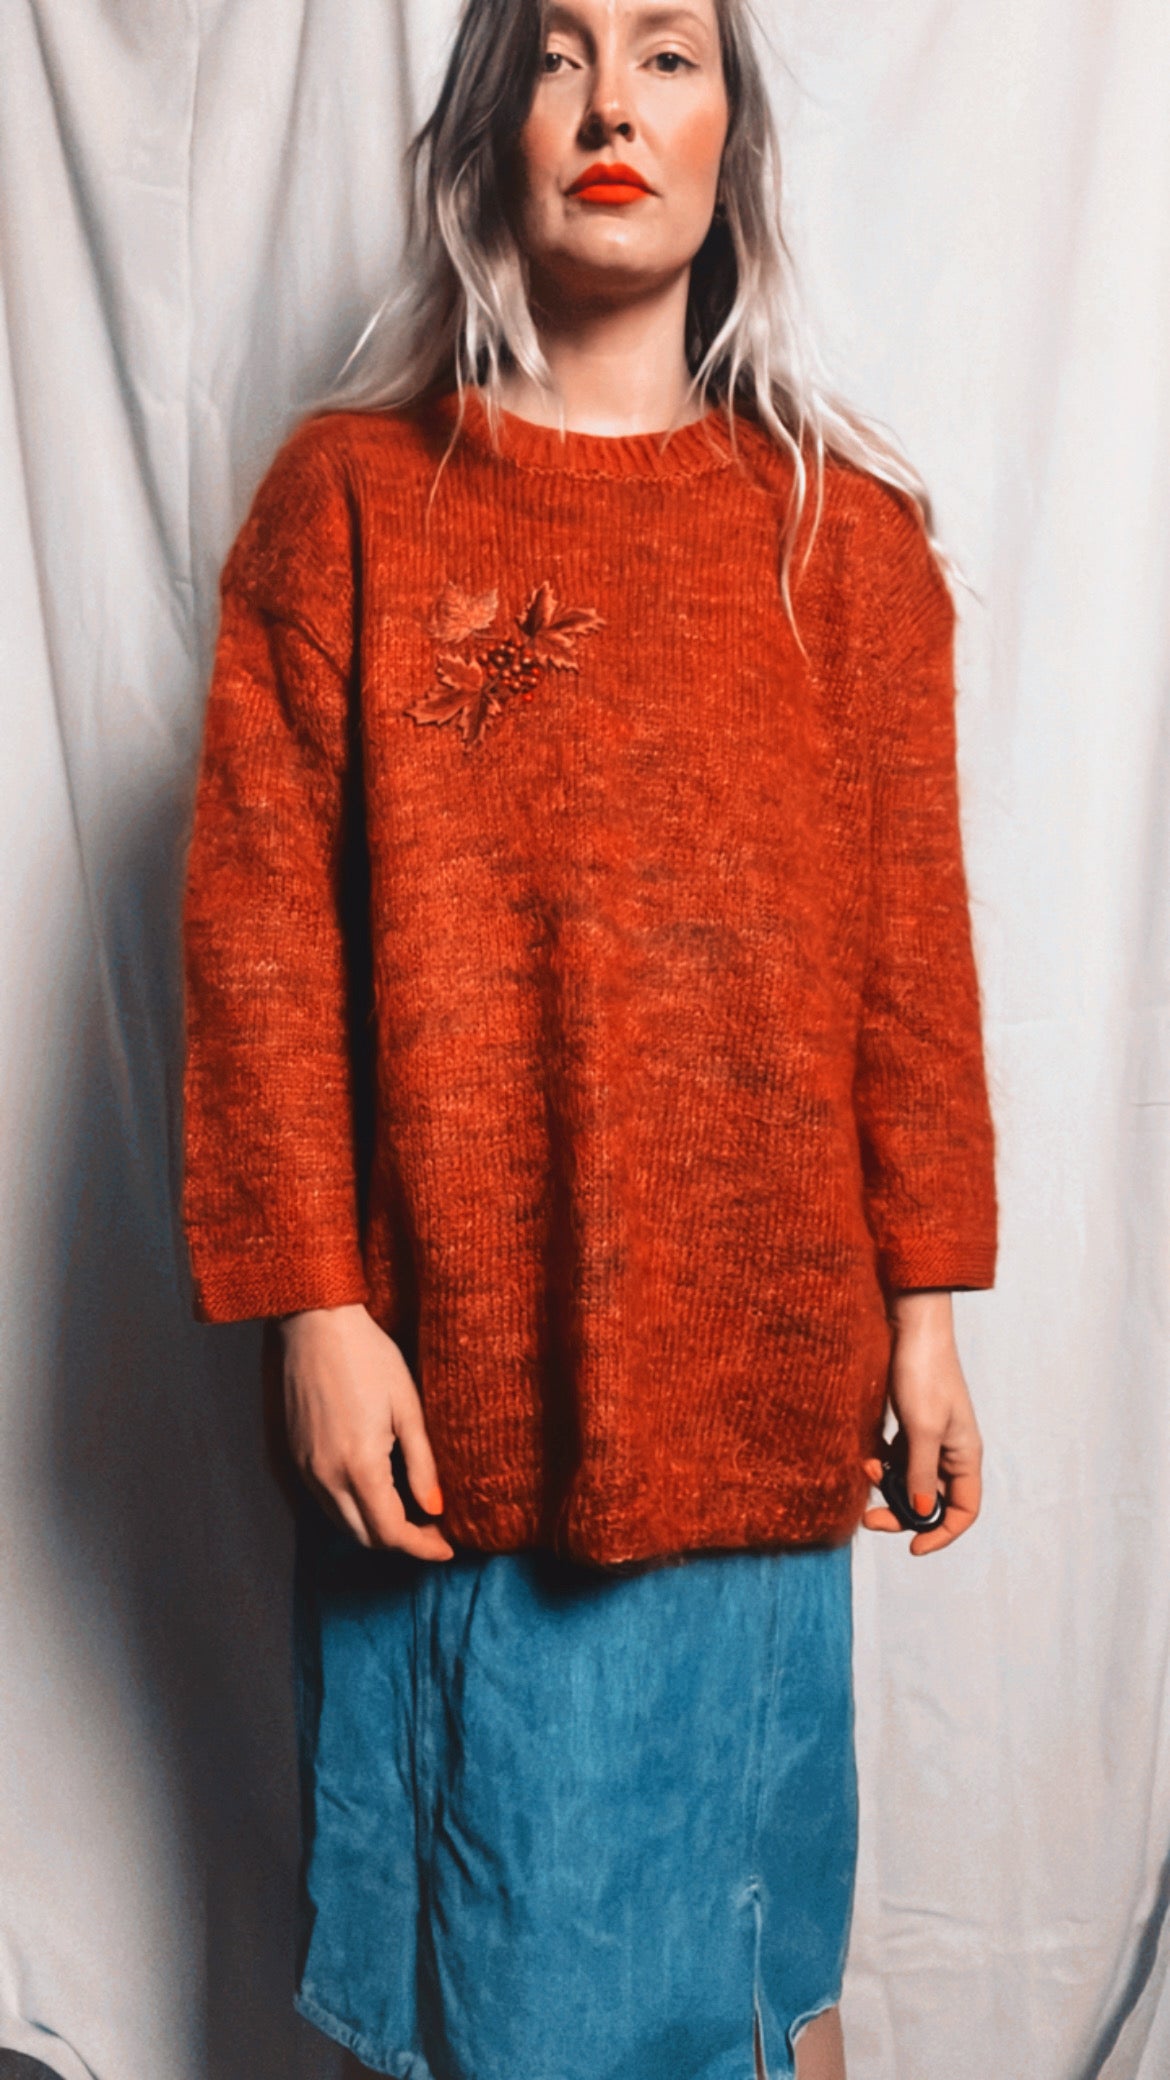 Soft and fluffy jumper